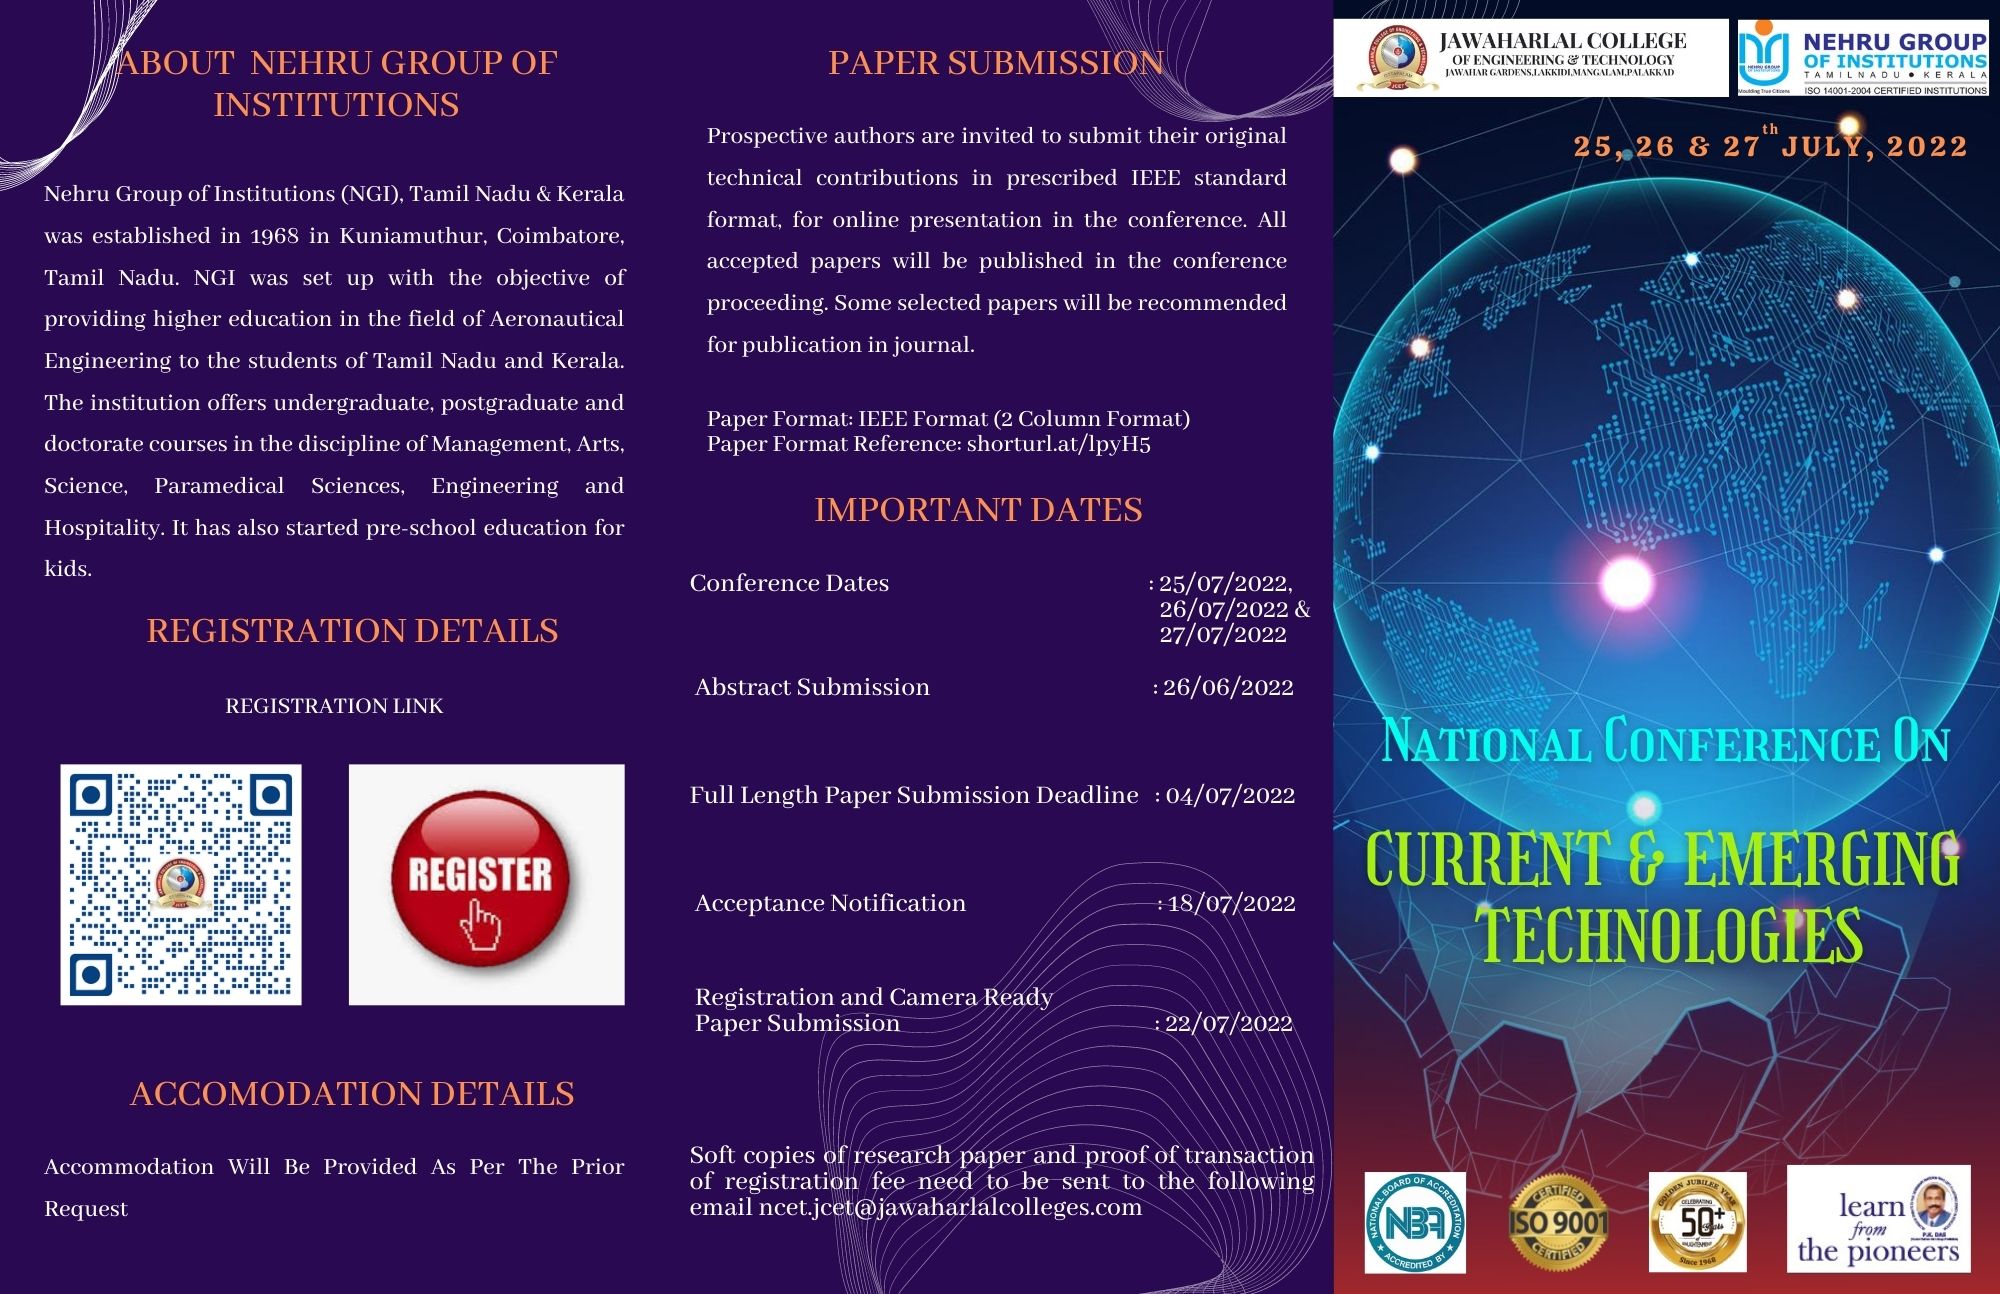 National Conference on Current and Emerging Technologies 2022